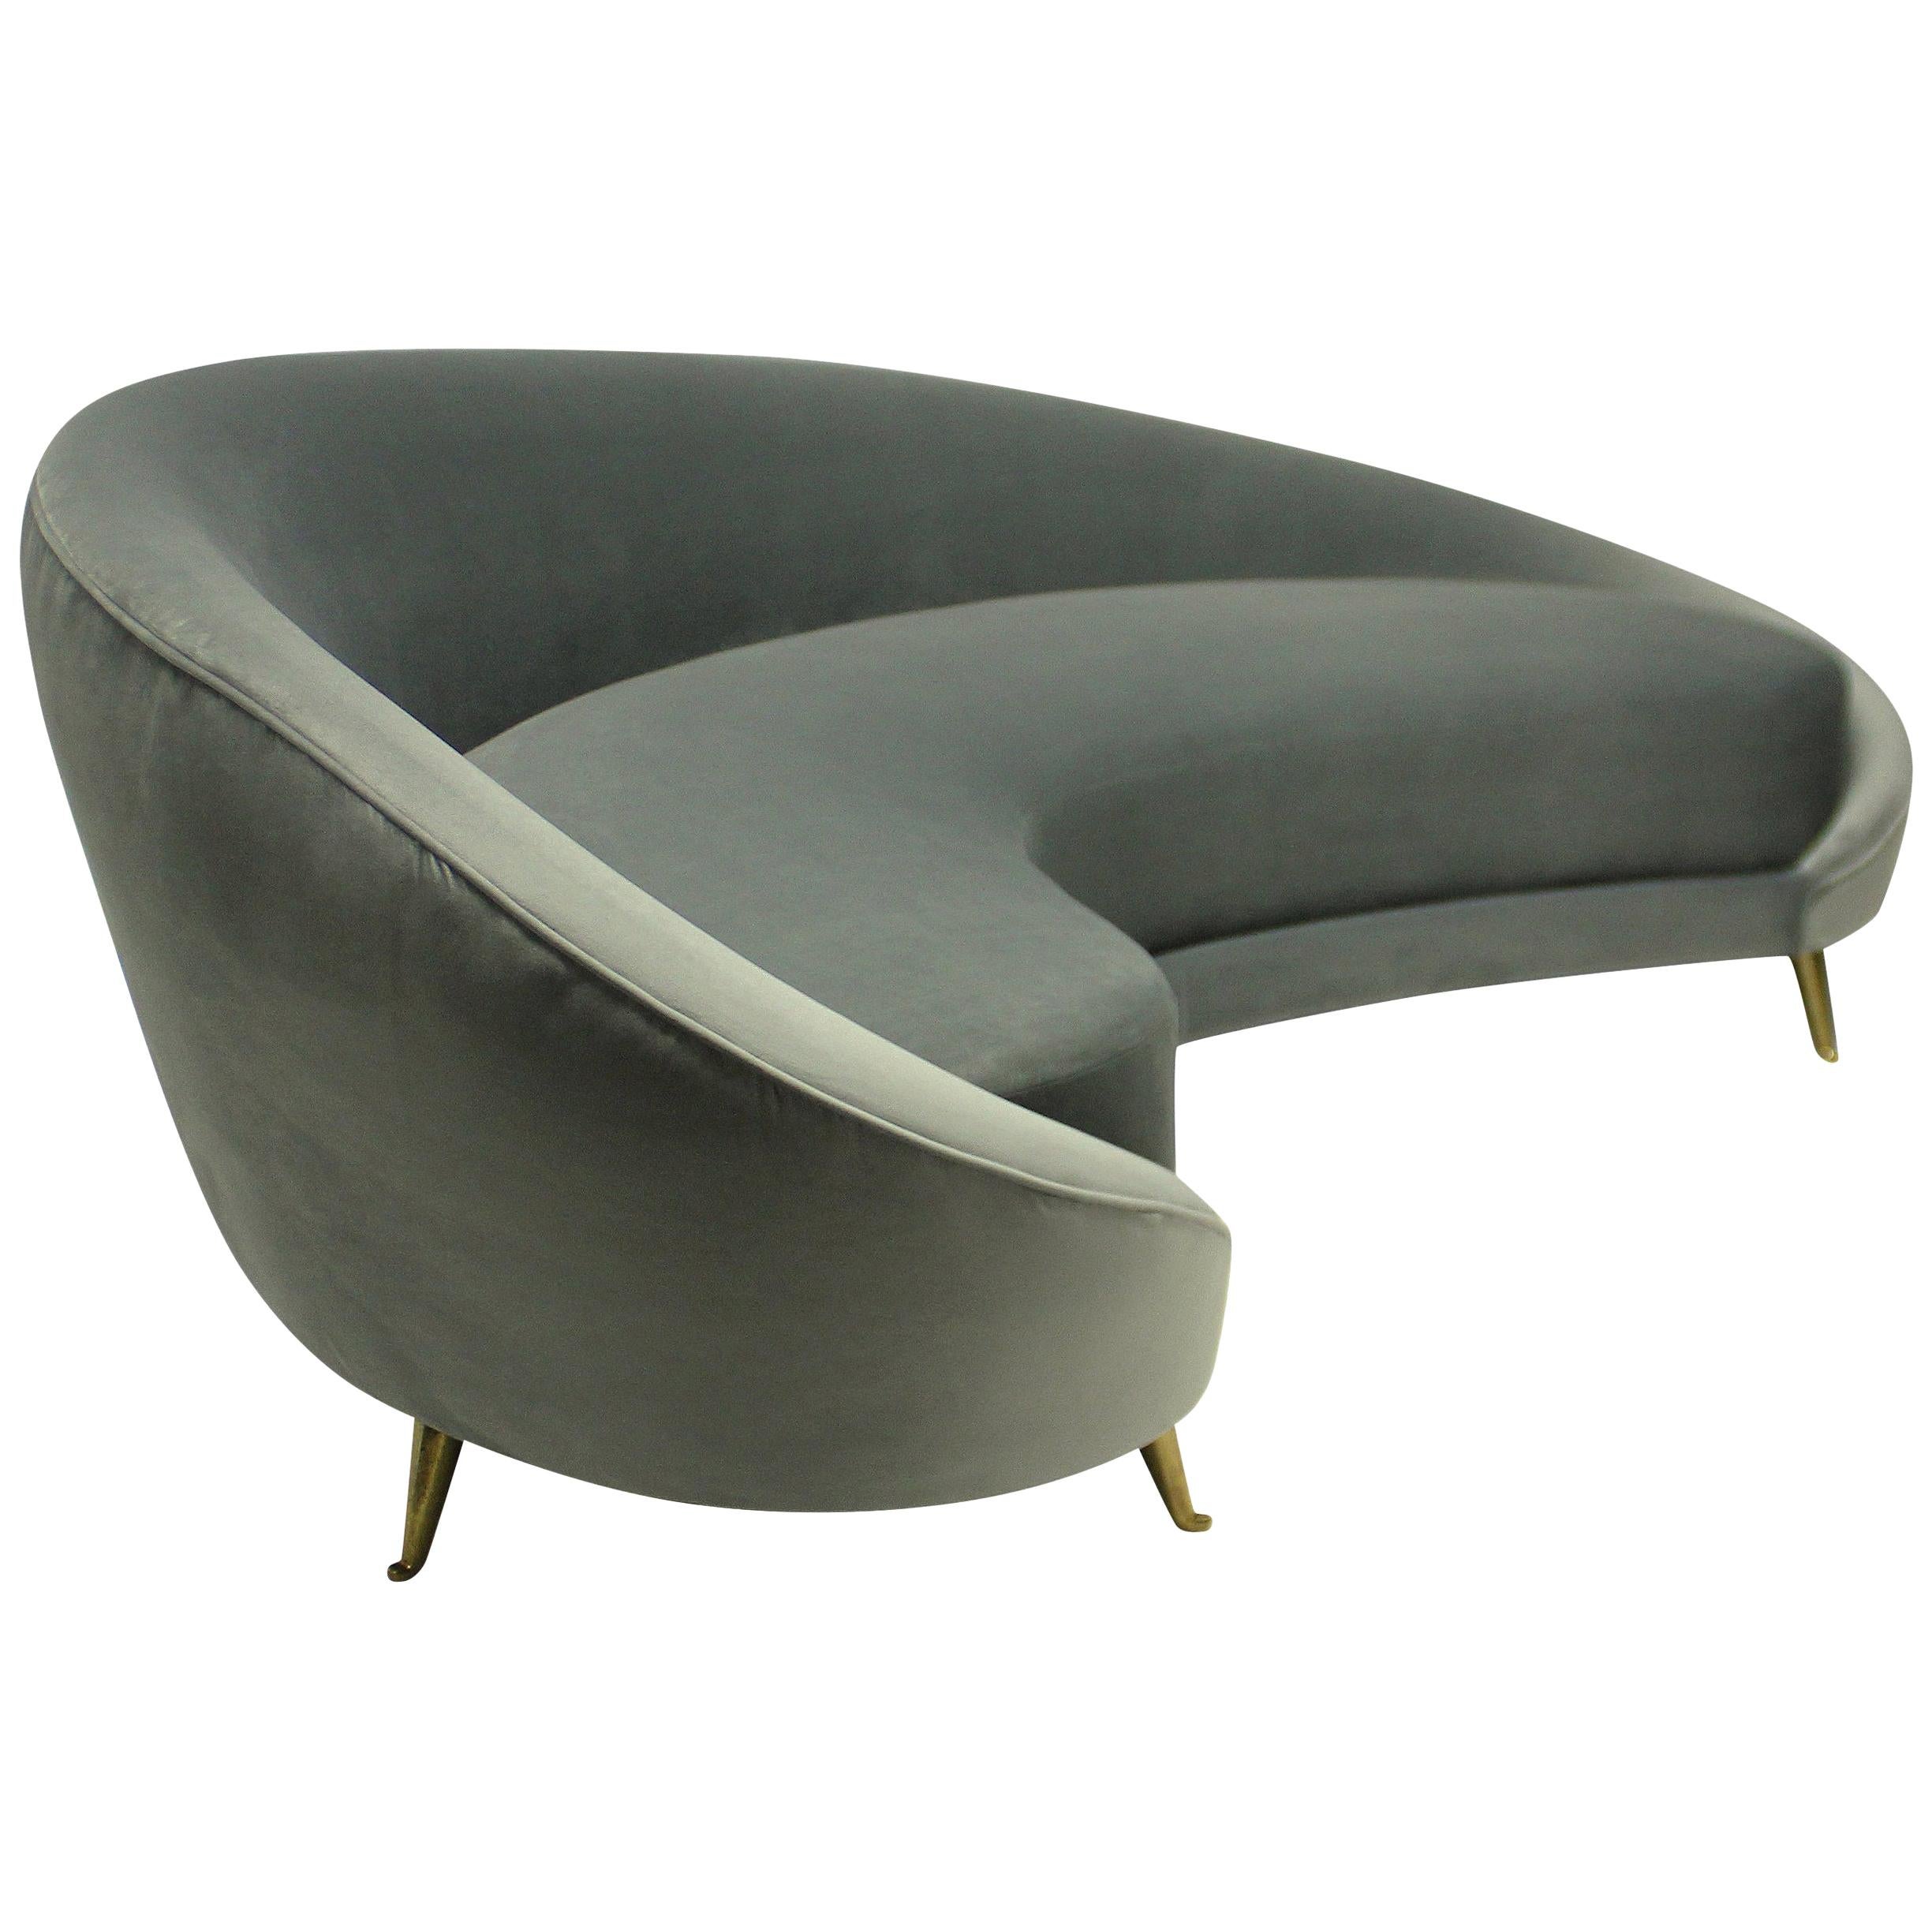 Large Iconic Sculptural Curved Sofa in the Style of Ico Parisi